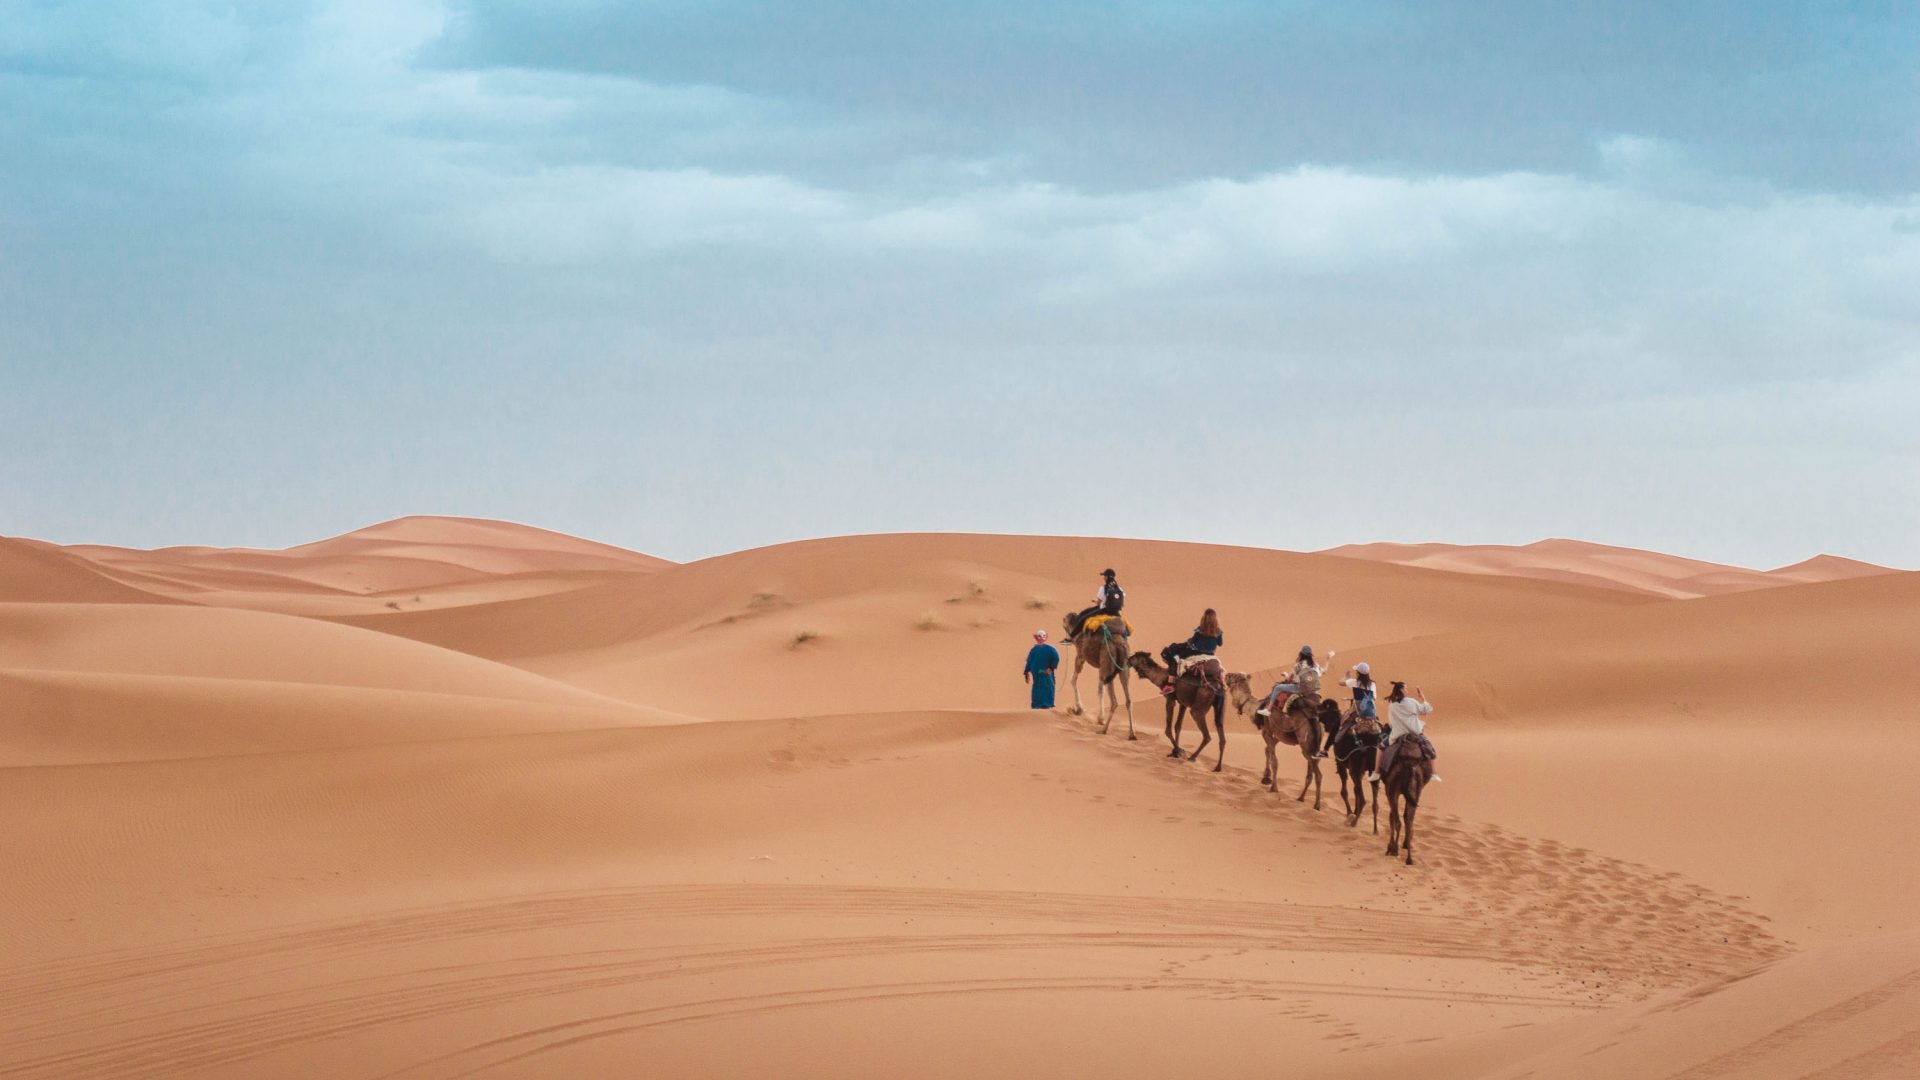 A guide leads travellers on camels through the desert.